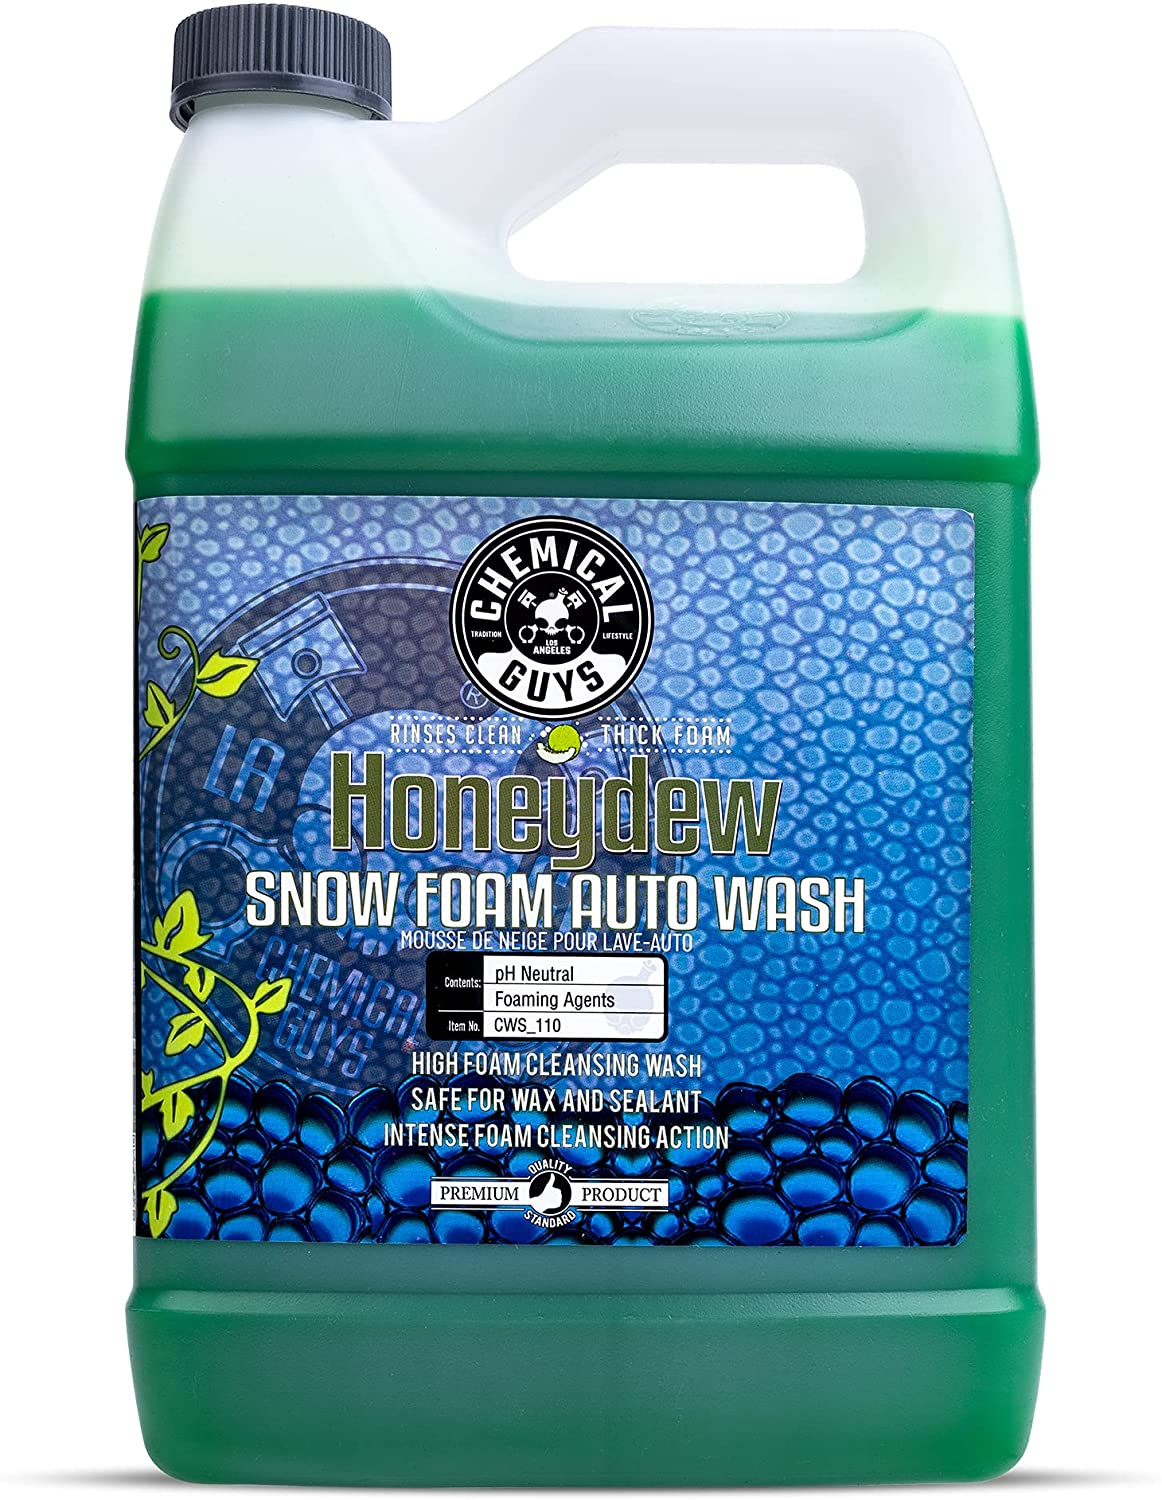 Chemical Guys Honeydew Snow Foam Car Wash Soap (Works with Foam Cannons, Foam Guns or Bucket Washes), 1 Gallon, $20.91 Free Shipping with Prime at Amazon